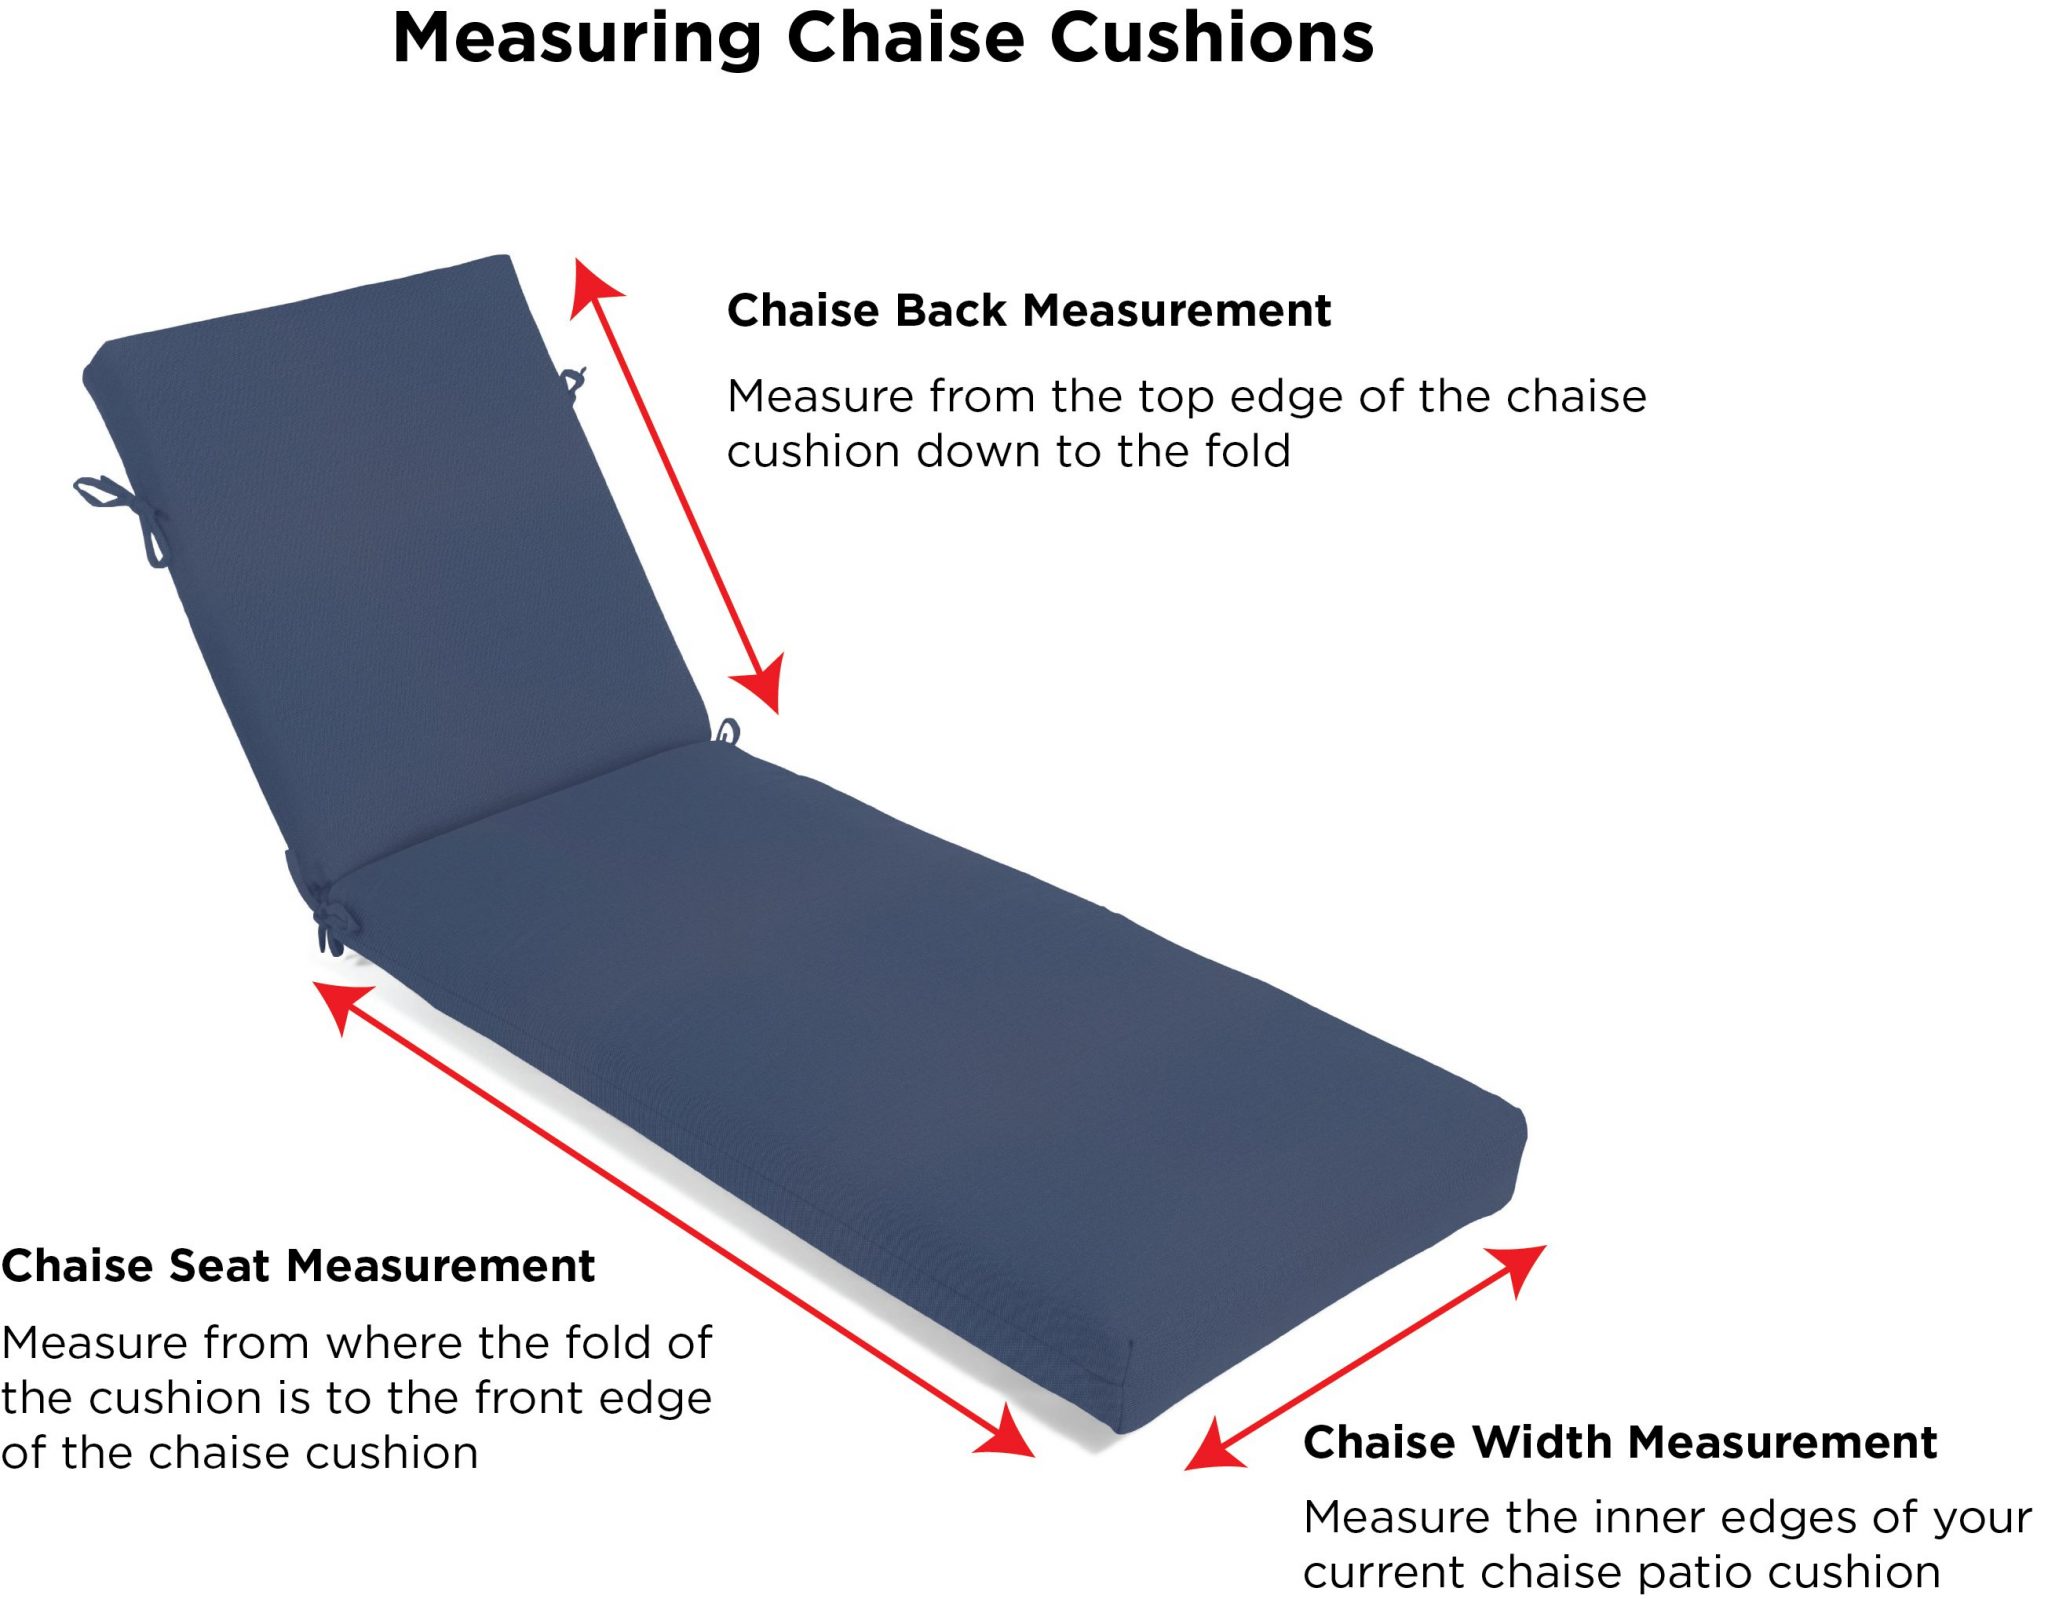 https://www.cushionconnection.com/wp-content/uploads/2021/02/How-to-Measure-Chaise.jpg